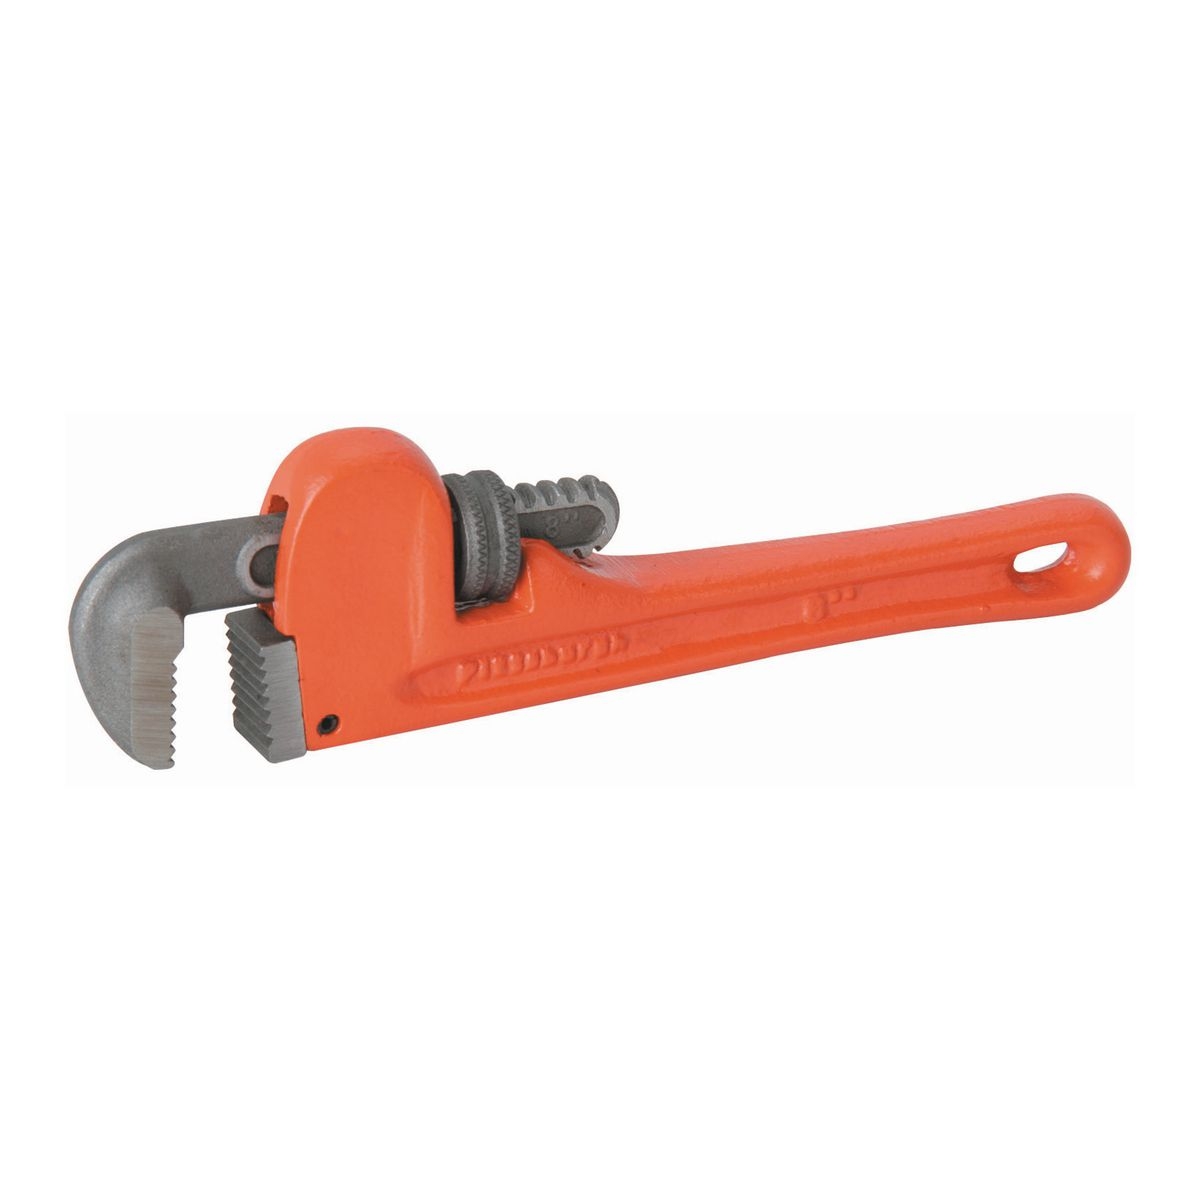 PITTSBURGH 8 in. Steel Pipe Wrench - Item 39641 / 61466